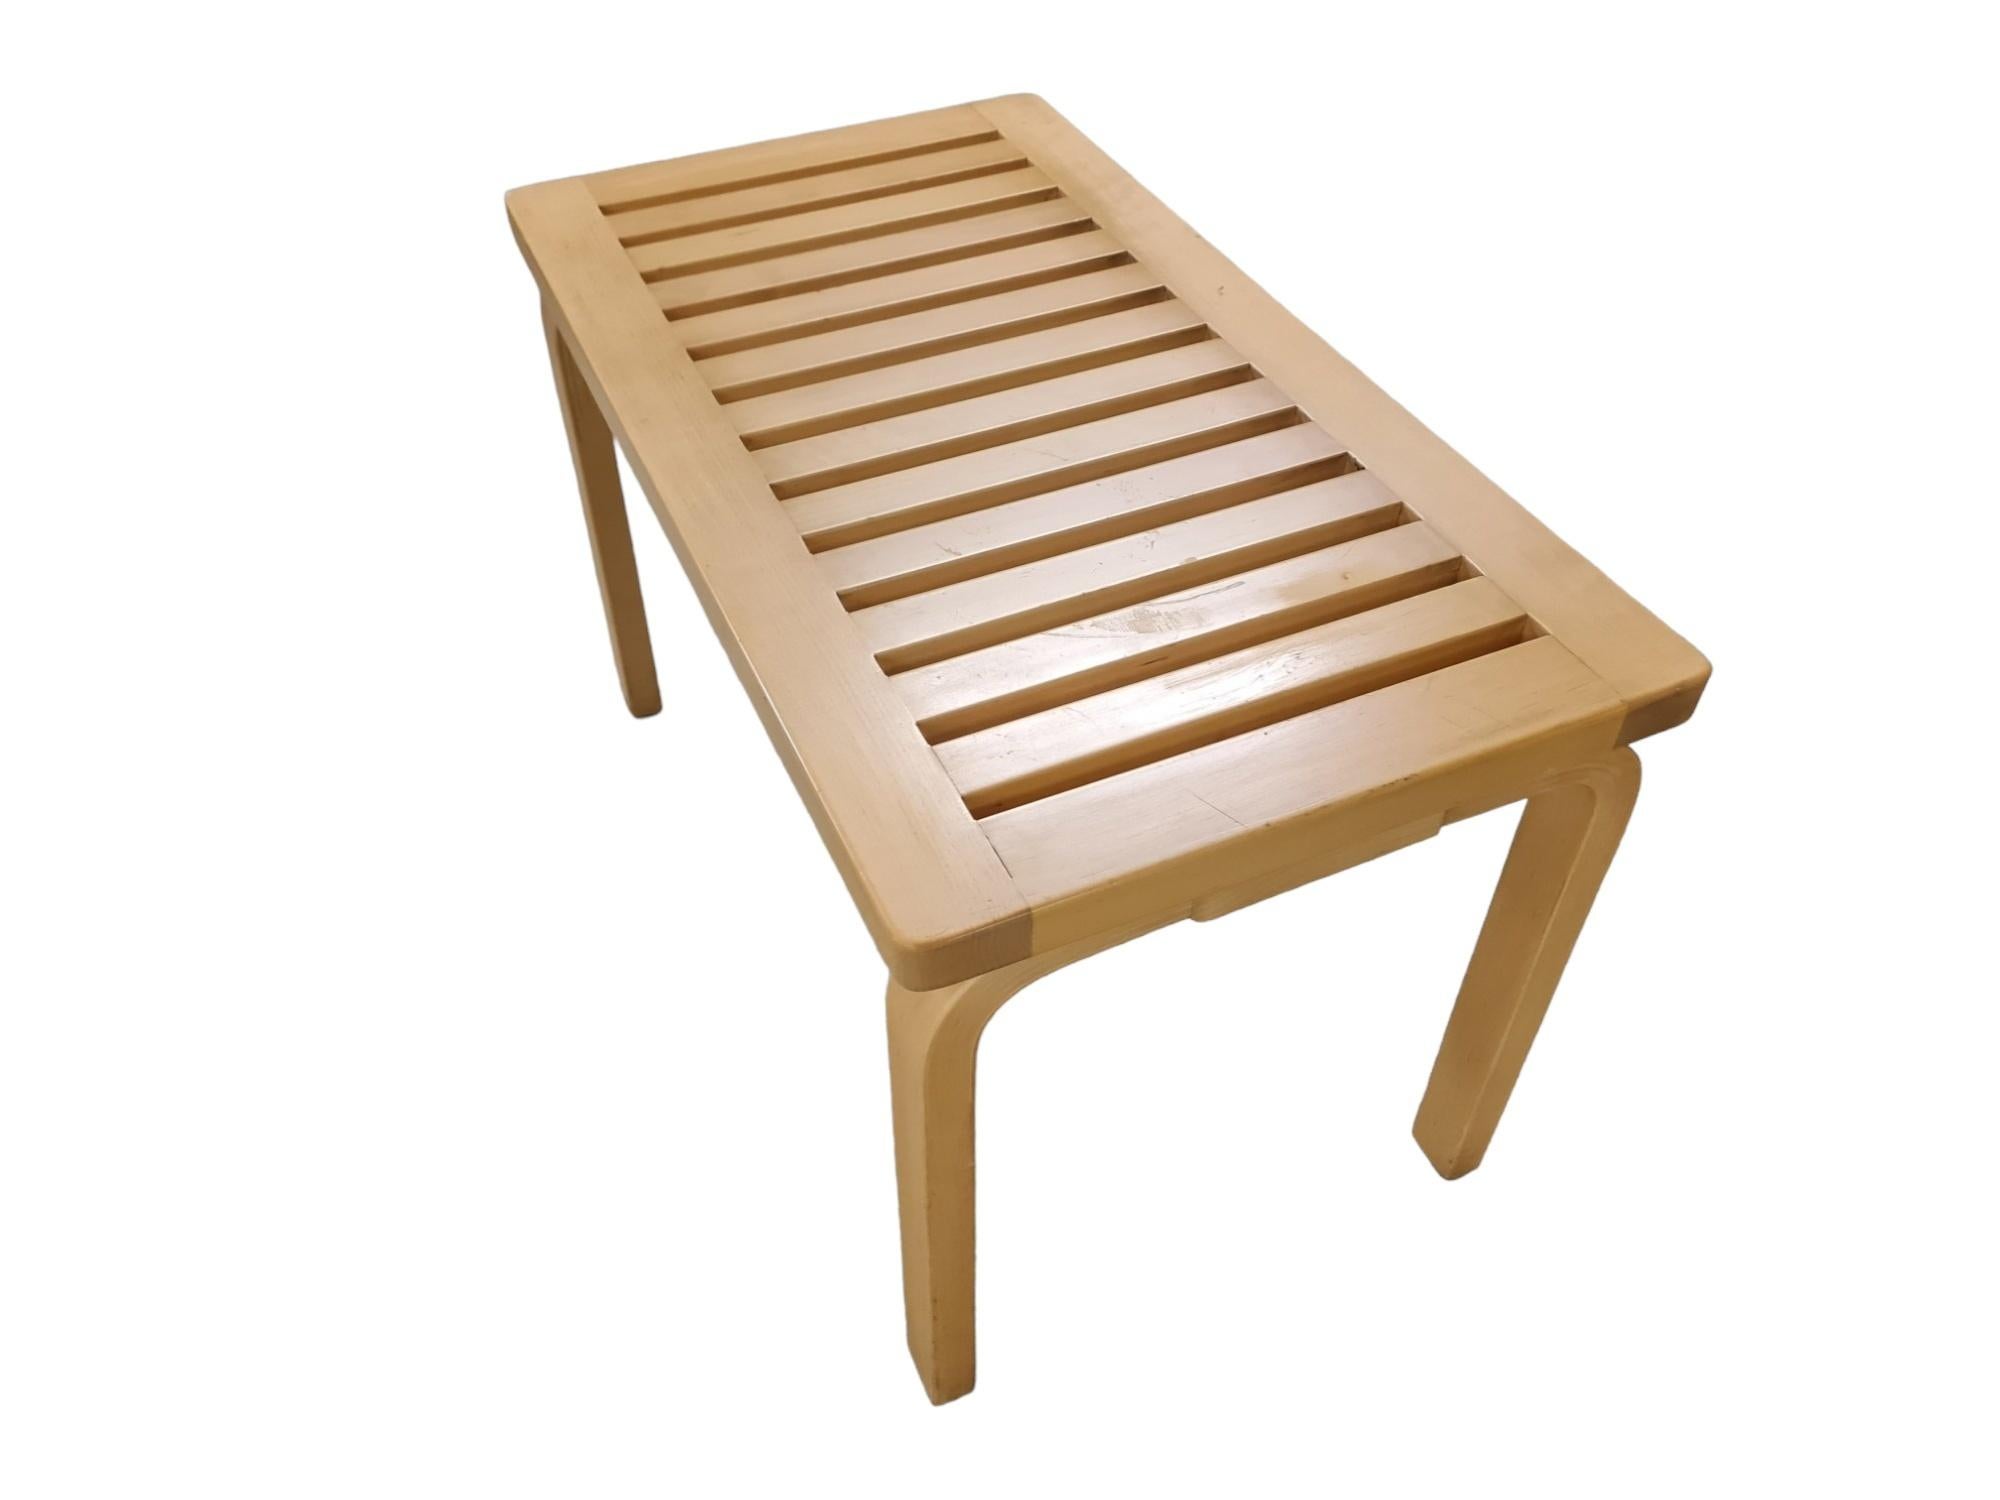 Iconic bench model 153 designed by Alvar Aalto and manufactured by Artek in the 1960s. The bench is in very good original condition.  As with a lot of Alvar Aalto's works  the beauty comes from the simplicity and functionalism. This plain bench has